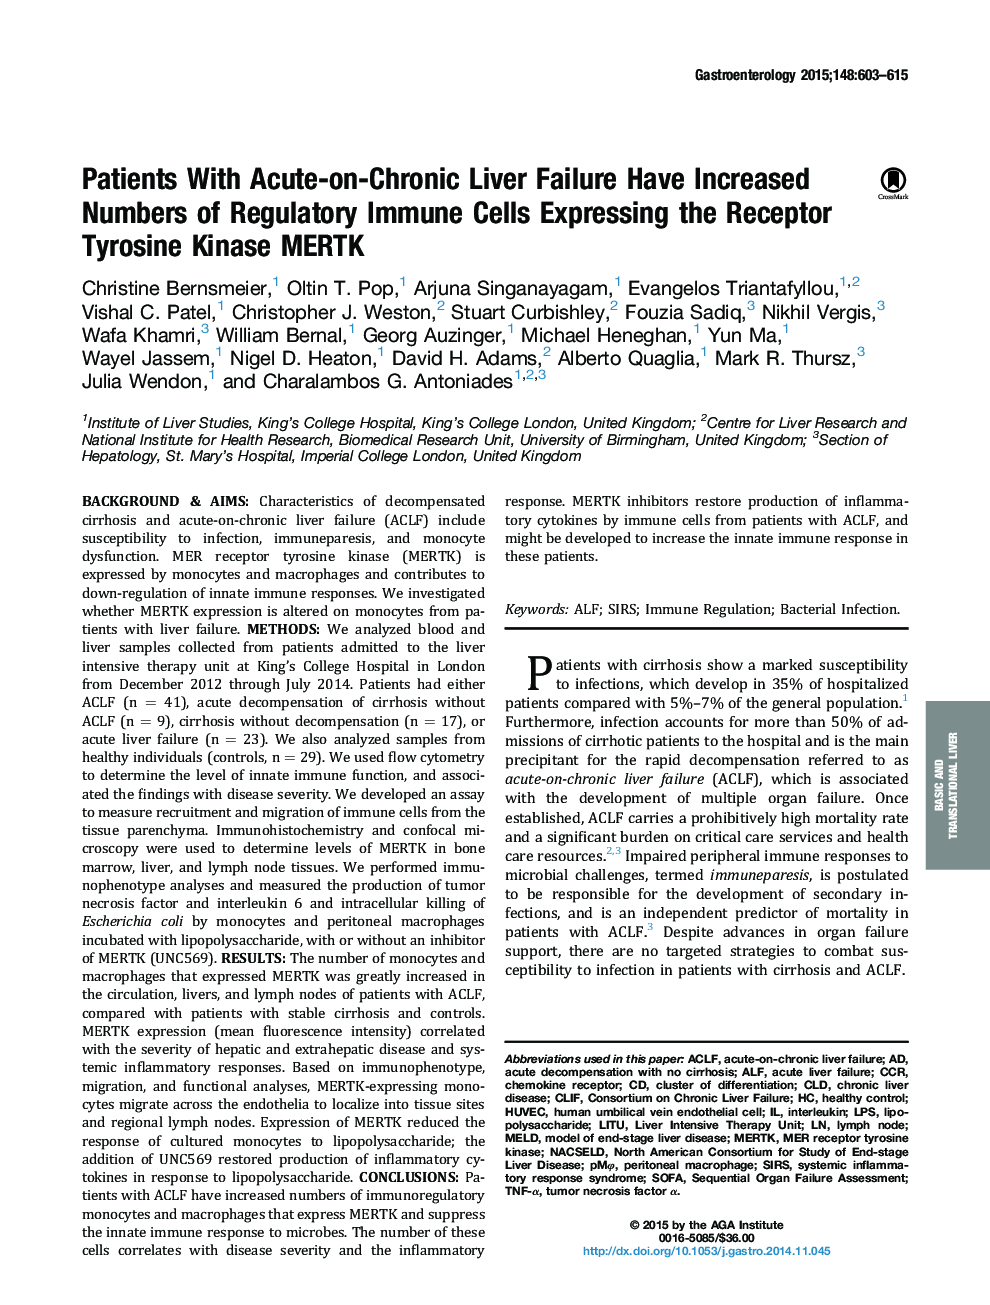 Patients With Acute-on-Chronic Liver Failure Have Increased Numbers of Regulatory Immune Cells Expressing the Receptor Tyrosine Kinase MERTK